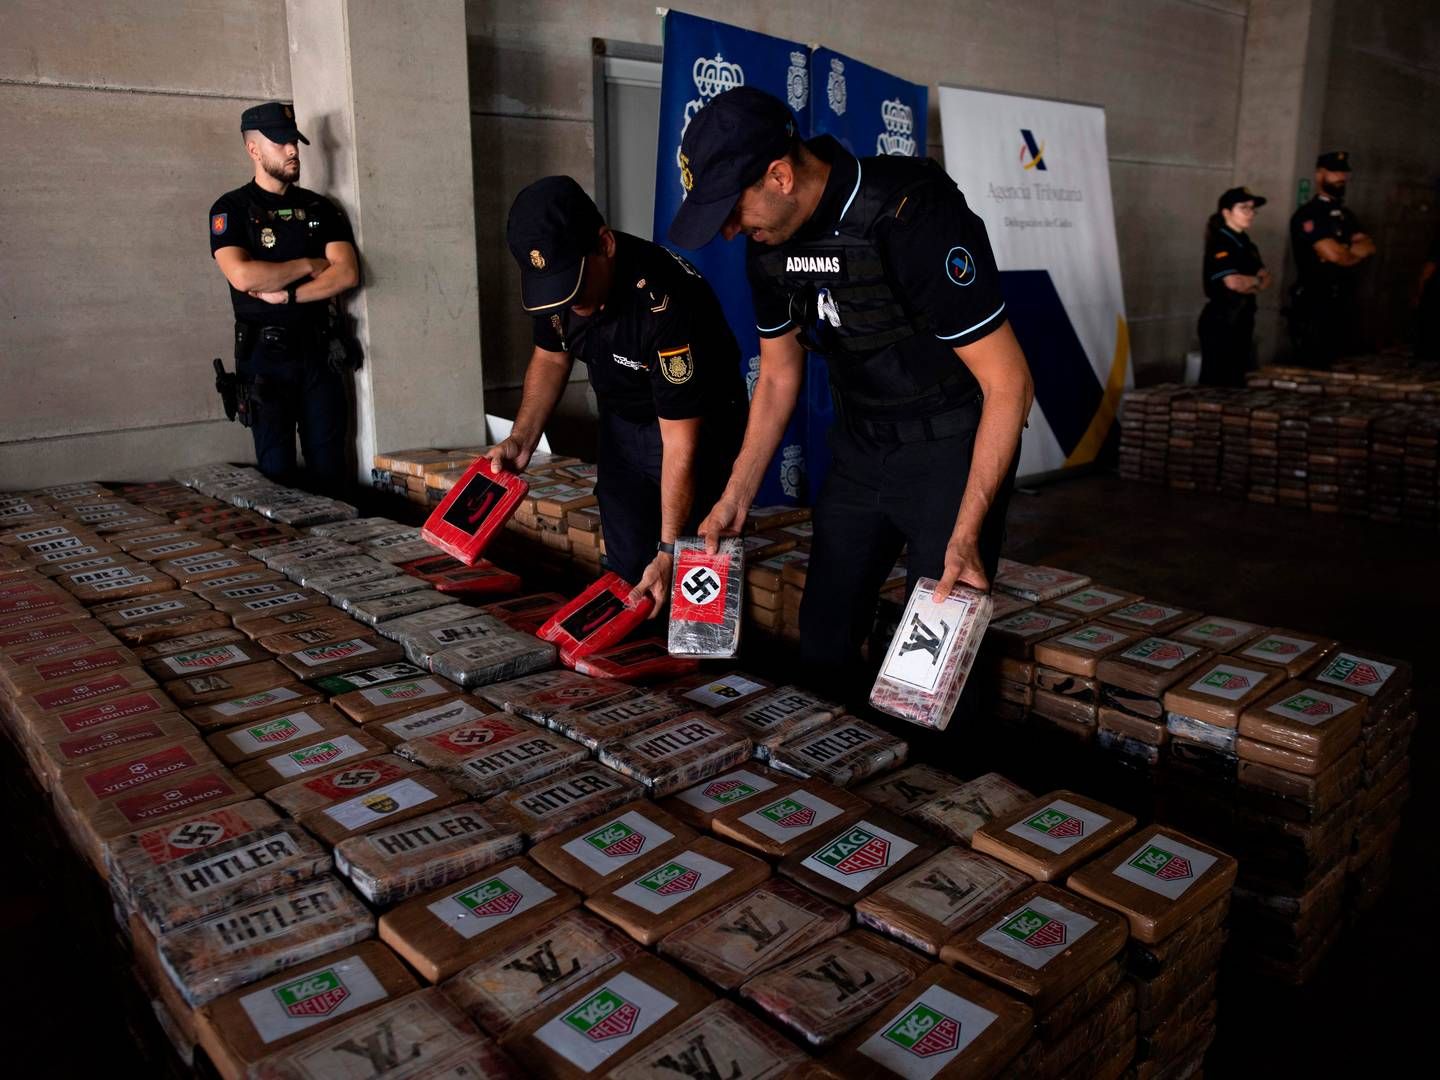 Spanish police at the Port of Algeciras found the bags of cocaine labeled with the logos of the criminal organizations they were to be delivered to. | Photo: Jorge Guerrero/AFP/Ritzau Scanpix